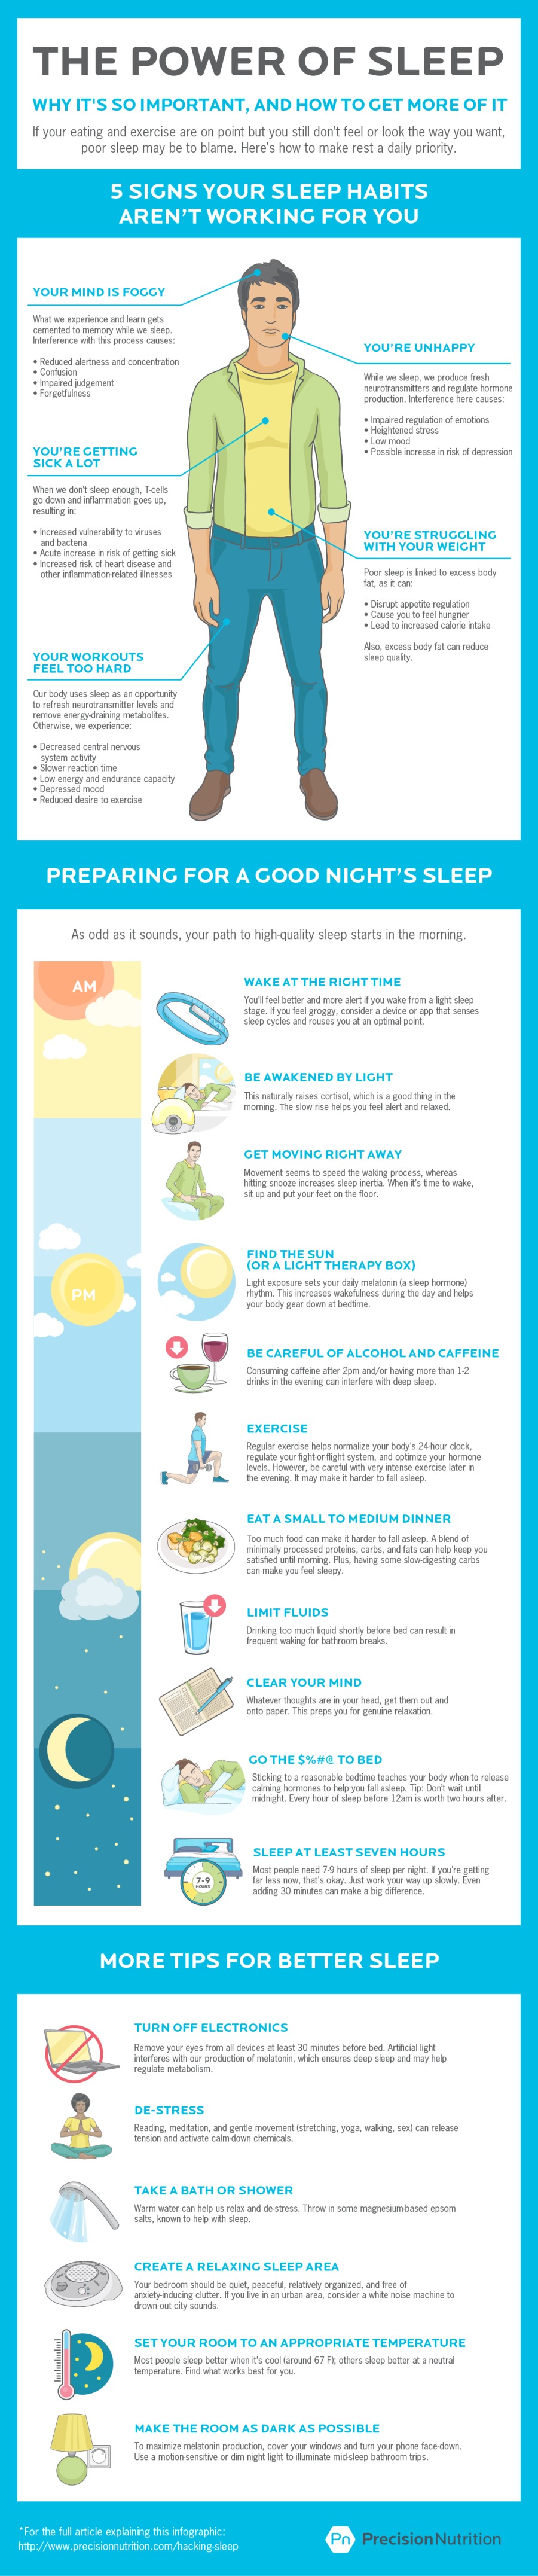 THE POWER OF SLEEP

WHY IT'S SO IMPORTANT, AND HOW TO GET MORE OF IT

If your eating and exercise are on point but you still don't feel or look the way you want,
poor sleep may be to blame. Here's how to make rest a daily priority.

S SIGNS YOUR SLEEP HABITS
AREN’T WORKING FOR YOU

YOUR MIND IS FOGGY

What we expenence and learn gets

cemented to memory whie we sieep.

Interference with thes process causes.
YOU'RE UNHAPPY

© Reduced alertness and concentradon

« Confusion

* mpared pdgement

« Forgetfulness

Whie we sleep, we produce fresh
newrot arsmtters and regulate hormone
production. Interference here Causes

« Impared regulaton of emotions
eghtened stress
ow mood
YOU'RE GETTING  Possbie increase mn risk of depression
SICK ALOT

nflammabon goes uo,

© roresed virabity to ses YOU'RE STRUGGLING
Acute mcrease nk of getting sick WITH YOUR WEIGHT
Poor sleep rs Inked to excess body
fat, as # can

appette regulation
You to feel hungrier
«Lead to mcreased calone mike

Aso, excess body fat can reduce
YOUR WORKOUTS sheep quality
FEEL TOO HARD

Our body uses sheep as an opportunty
10 refresh neurotransmitter levels and
remove energy Sranng metaboltes
Otherwise, we expenence

© Decreased central nervous
System actwty
© Slower reaction time
* Low energy and endurance capaaty
Depressed mood
* Reduced desre 10 exercise

PREPARING FOR A GOOD NIGHT'S SLEEP

As odd as it sounds, your path to high-quality sleep starts in the morning

WAKE AT THE RIGHT TIME

You'l feel bette and more alert f you wake from a ight sleep
stage. f you feel groggy, consider a dewce of 30D that senses
sleep Cycles and rouses you a an opbmal pont

BE AWAKENED BY LICHT

Thes naturally raises cortisol, whech 1s 3 200d thing i the
mormng. The siow rise heips you feel alert and relaxed

GET MOVING RIGHT AWAY

Movement seems to speed the waking process, whereas
hitting snooze mcreases sleep nerba. When &'s Sme to wake
st 1 and put your feet on the floor

FIND THE SUN
(OR A LIGHT THERAPY BOX)

Light exposure sets your dady melatonin (a sleep hormone)
thythm. Thes creases waketuness dung the day and helps
your body gear down at bectme

BE CAREFUL OF ALCOHOL AND CAFFEINE

Consuming cafiemne after 2pm and/or hang more than 12
dnnks in the evening can mterfere with deep sleep.

EXERCISE

Regular exercise helps normakze your body's 24-hour dock.
regulate your hightor fight system, and optimize your hormone
levels. However, be careful with very ntense exercrse later
the evening. ® may make t harder to fall asleep

EAT A SMALL TO MEDIUM DINNER

Toc much food can make harder to tall asieep. A blend of
fanaa processed protens, carbs, and fats can help keep you
sabisbed unti morning. Plus, hawng some slowdgestrg carbs
can make you feel sieepy

LIMIT FLUIDS

Drinking 100 much bawd shortly before bed can result m
froquent waking for bathvoom breaks

CLEAR YOUR MIND

Whatever thoughts are in your head, get them out and
onto paper. Thes preps you for genuine relaxation

CO THE $%#@ TO BED

Stcking 10 a reasonable bedsme teaches your body when to release
calming hormones to help you fall asieep Tp: Dont wast und
adright. Every hour of sleep before 12am is worth two hours after

SLEEP AT LEAST SEVEN HOURS

far less now, that's okay. Just work your way

Most people need 7.9 hours of sieep per ght F you're getting
» slowly. Even
addng 30 minutes can make a beg difference.

TURN OFF ELECTRONICS

Remove your eyes from al dewces at least 30 minutes before bed. Arthicial kght
mterferes with our production of melatormn, wach ensures deep skeep and may help
regulate metaboksm

DE-STRESS

won, and gentle movement (stretching, yoga, walking, sex) Can release
tate camdown chemecals.

TAKE A BATH OR SHOWER

Warm water can help us relax and de-stress. Throw mn some magnesambased epsom
salts, known to help with sleep

CREATE A RELAXING SLEEP AREA

Your bedroom should be quiet, peaceful, relatively organzed, and free o
anuety-nducing clutter. If you ve in an urban area, consider a white nose machine to
drown out City sounds.

SET YOUR ROOM TO AN APPROPRIATE TEMPERATURE

Most people sleep better when t's cool (around 67 FI; others sleep better at a neutral
temperature. Find what works best for yo

MAKE THE ROOM AS DARK AS POSSIBLE

To manmize melatons on, cover your windows and tur your phone face-down
Use 2 modo sensative or drm neght kght to ilumnate mid seep bathroom tps